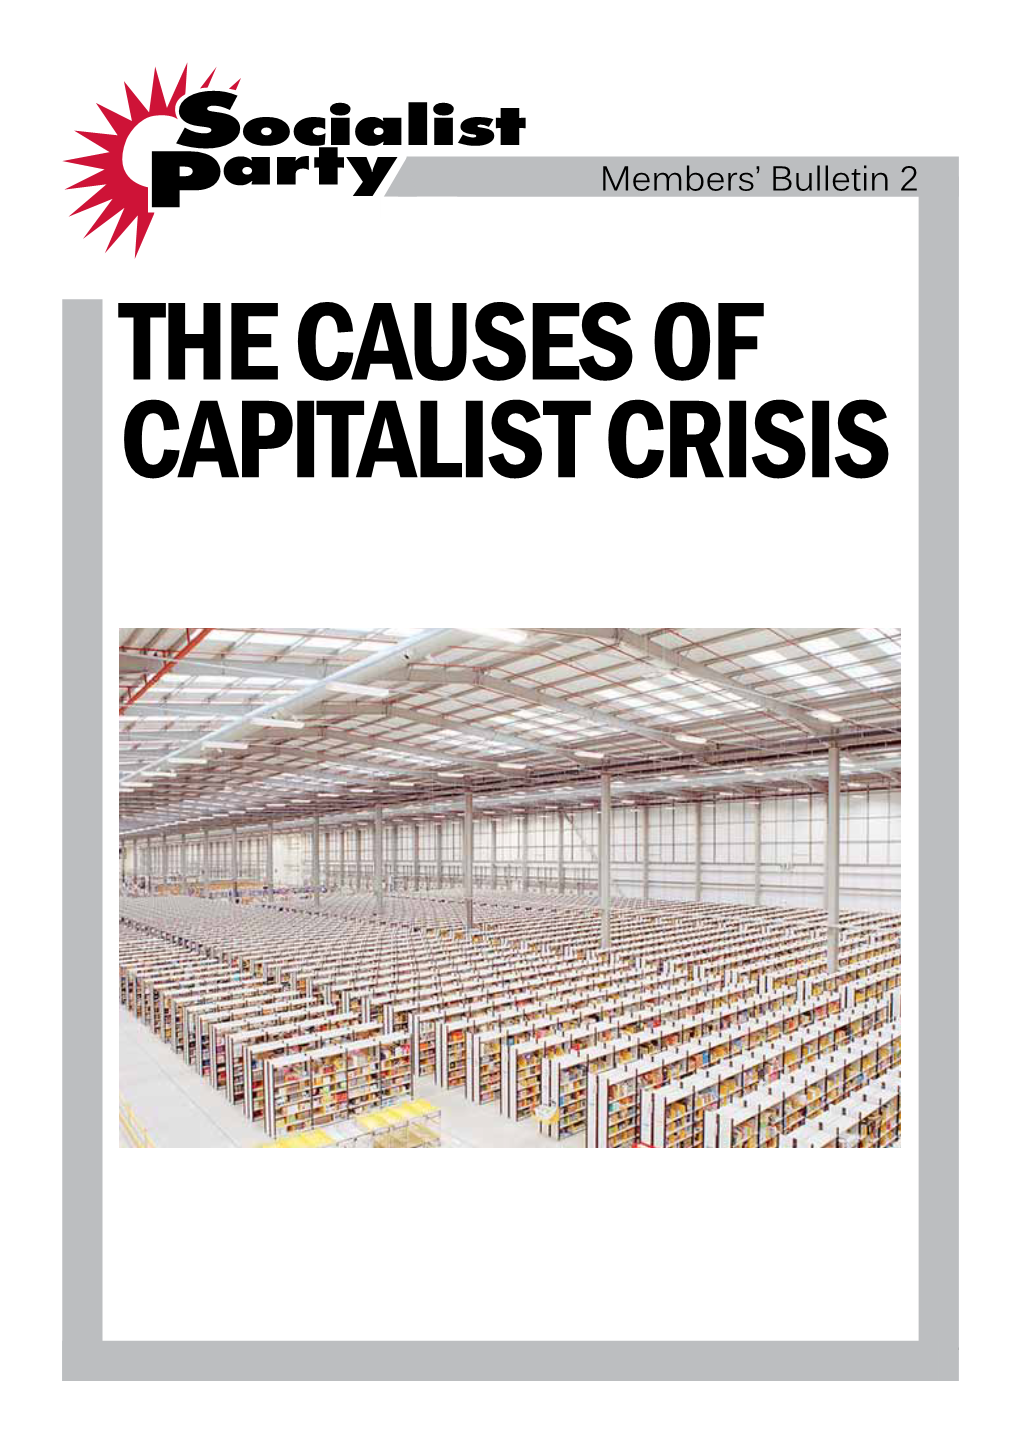 The Causes of Capitalist Crisis